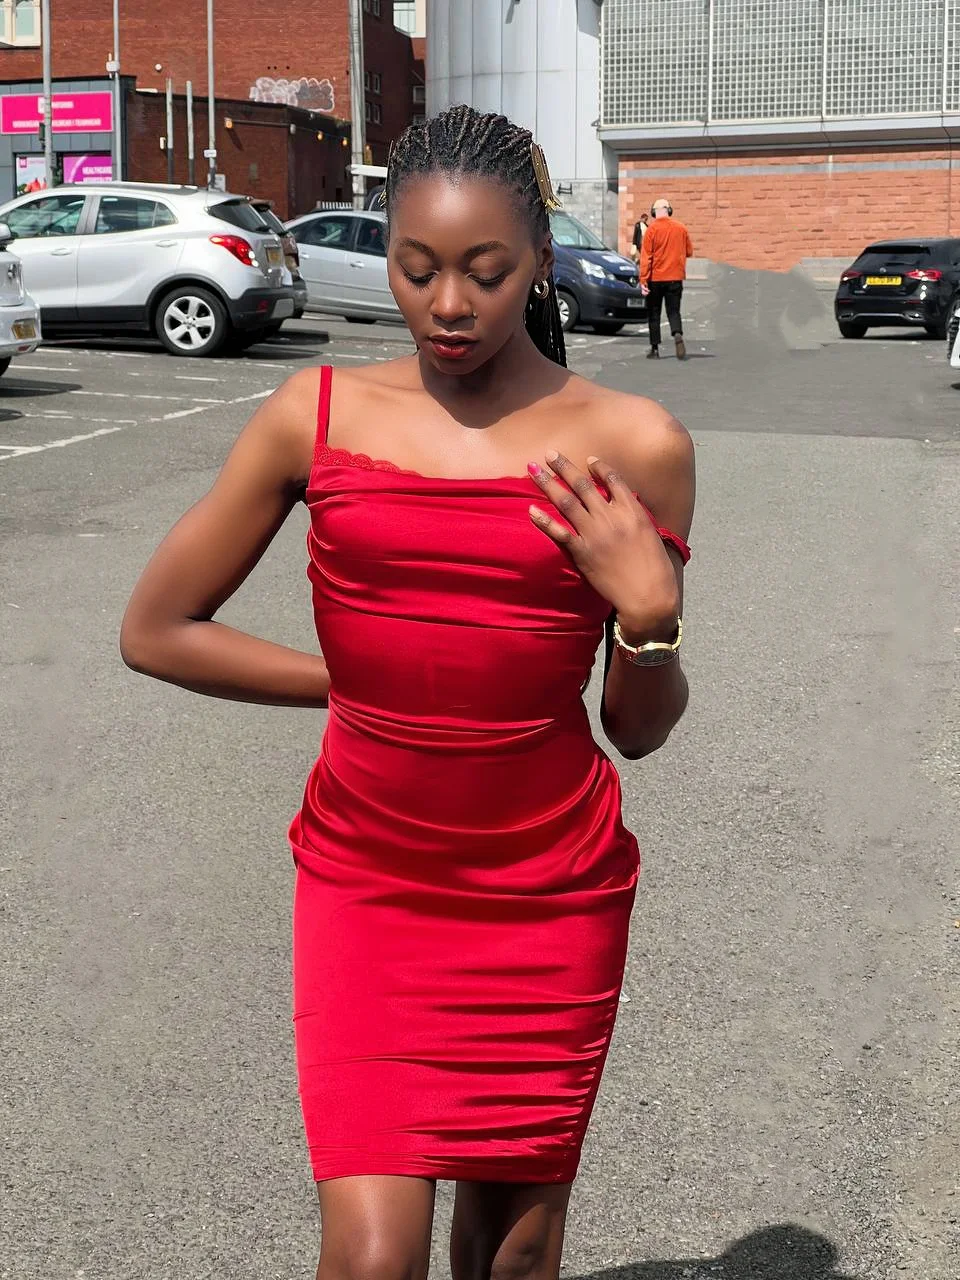 How to score in a red dress